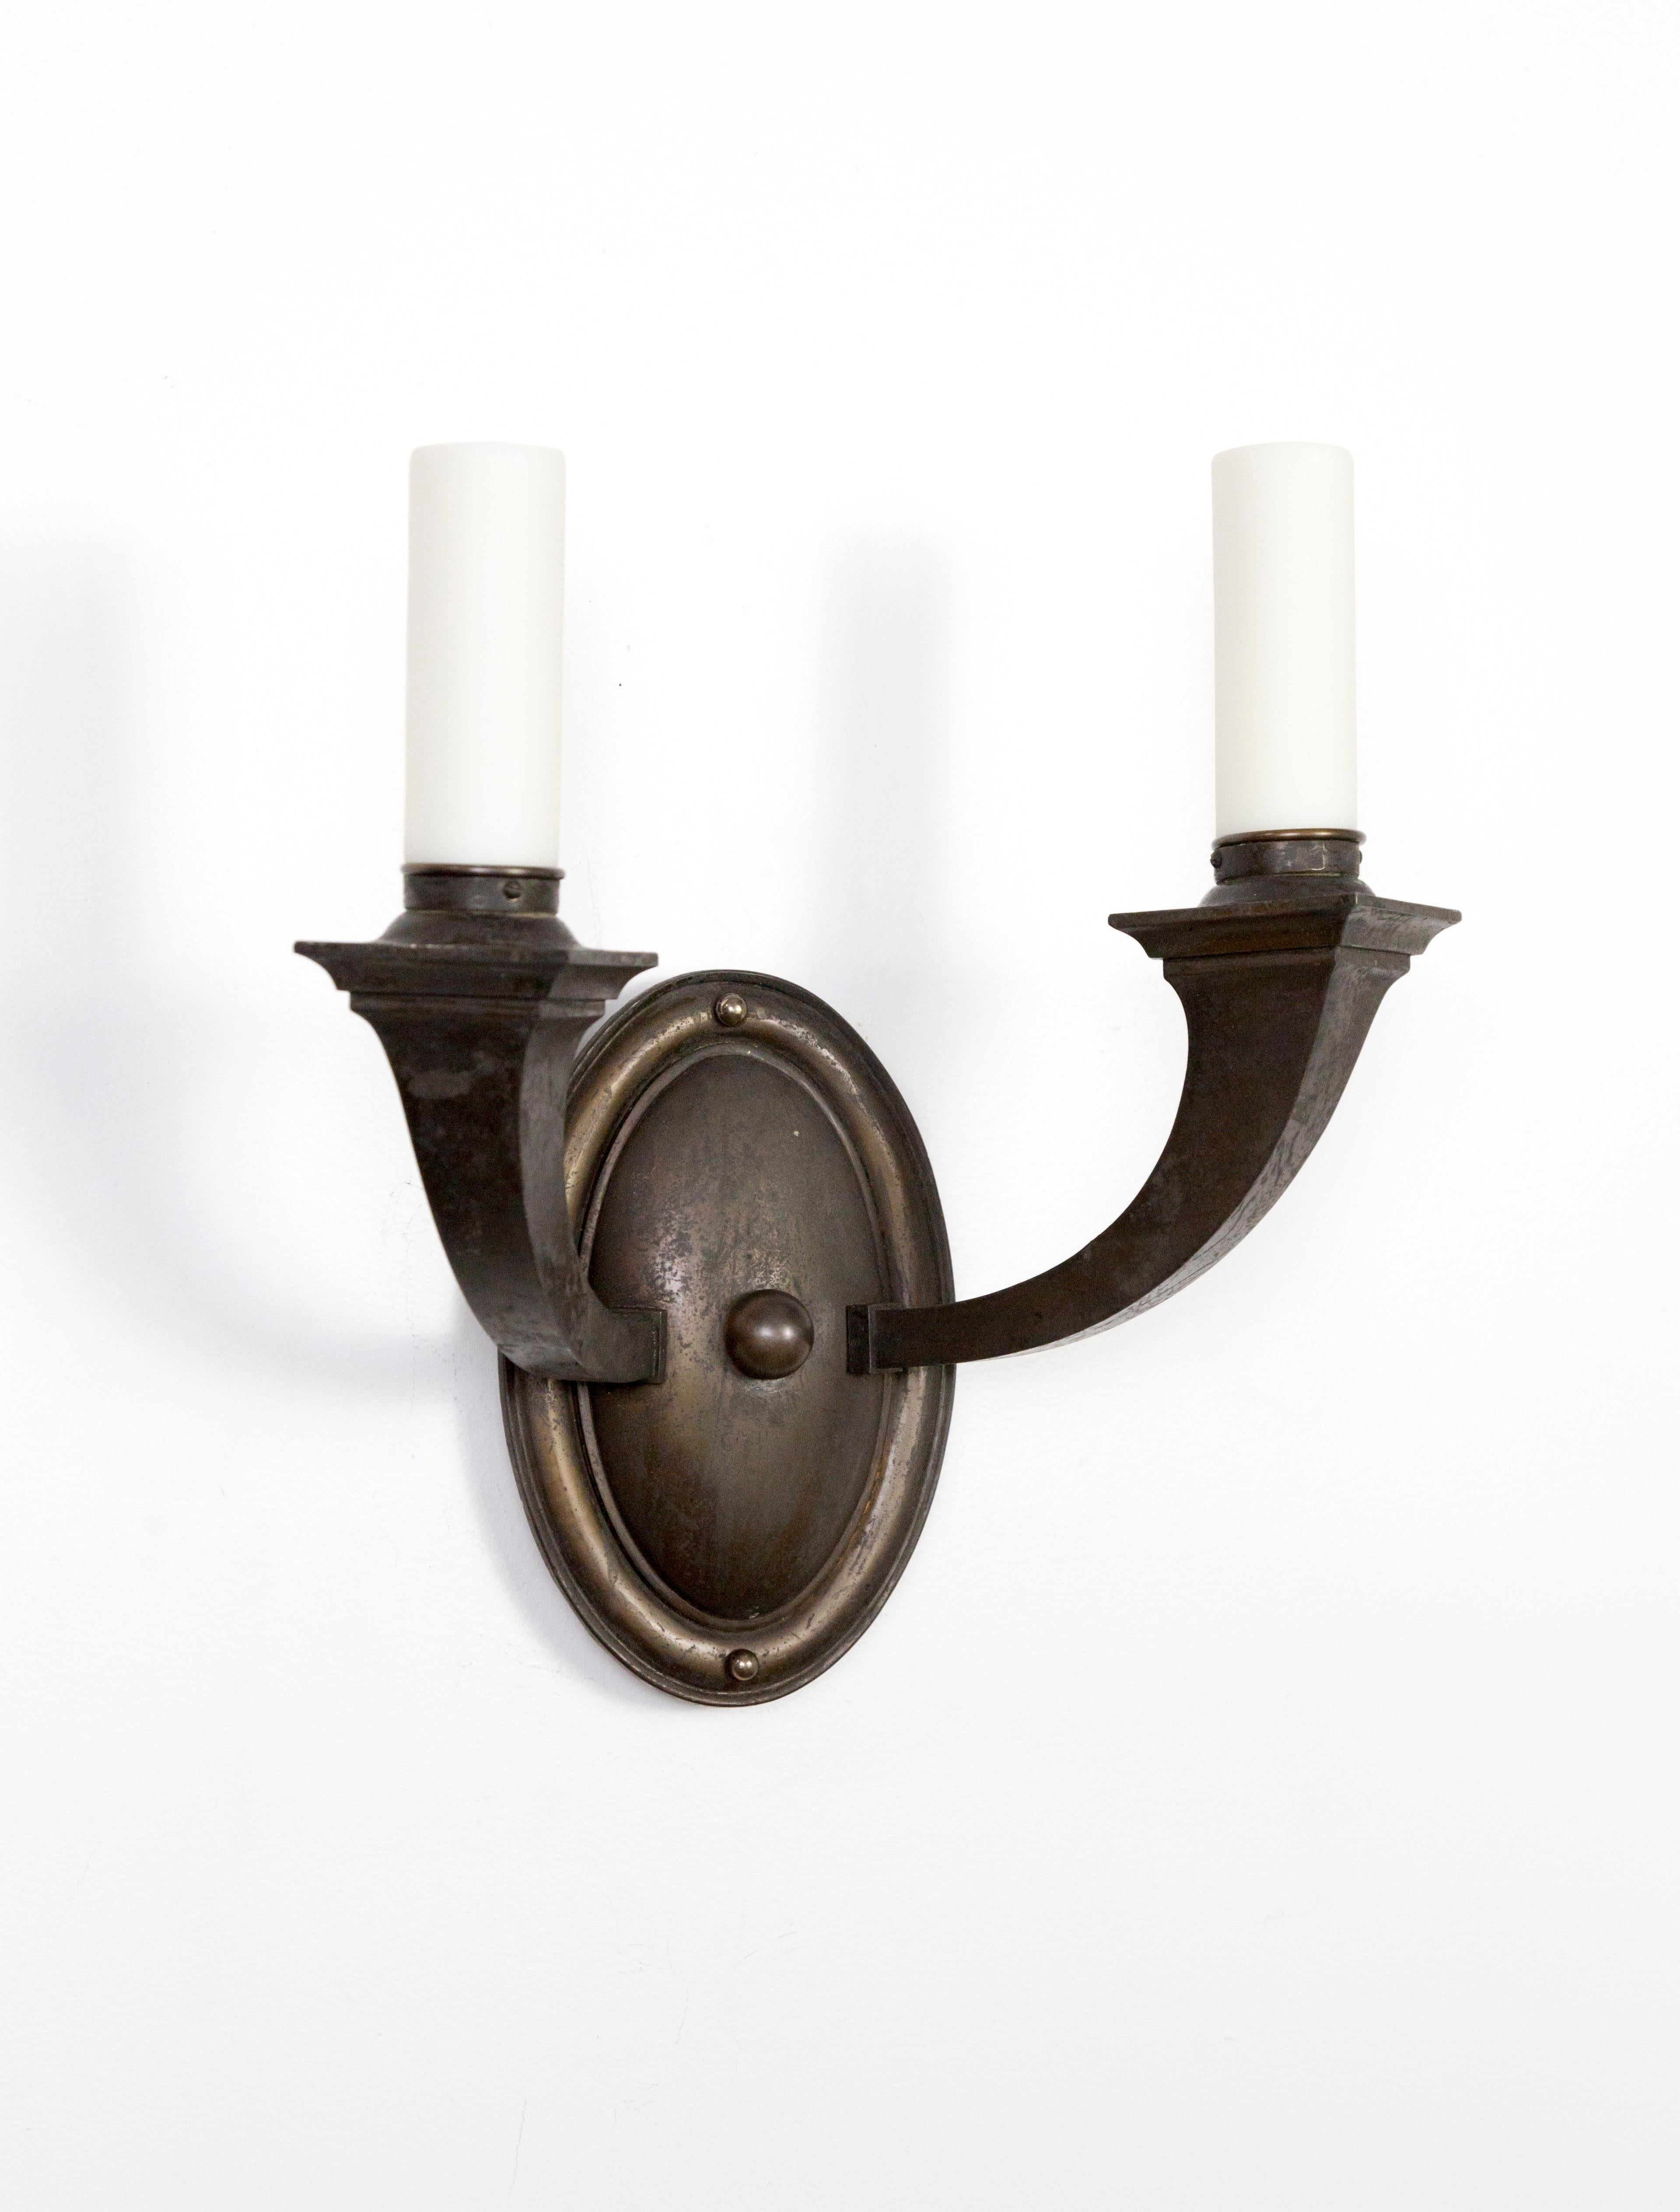 A set of three American, Arts & Crafts, bronze, 2-arm sconces. Egg form escutcheon mounts, with strong, squared off candle supports. Newly rewired. Measures: 13.5